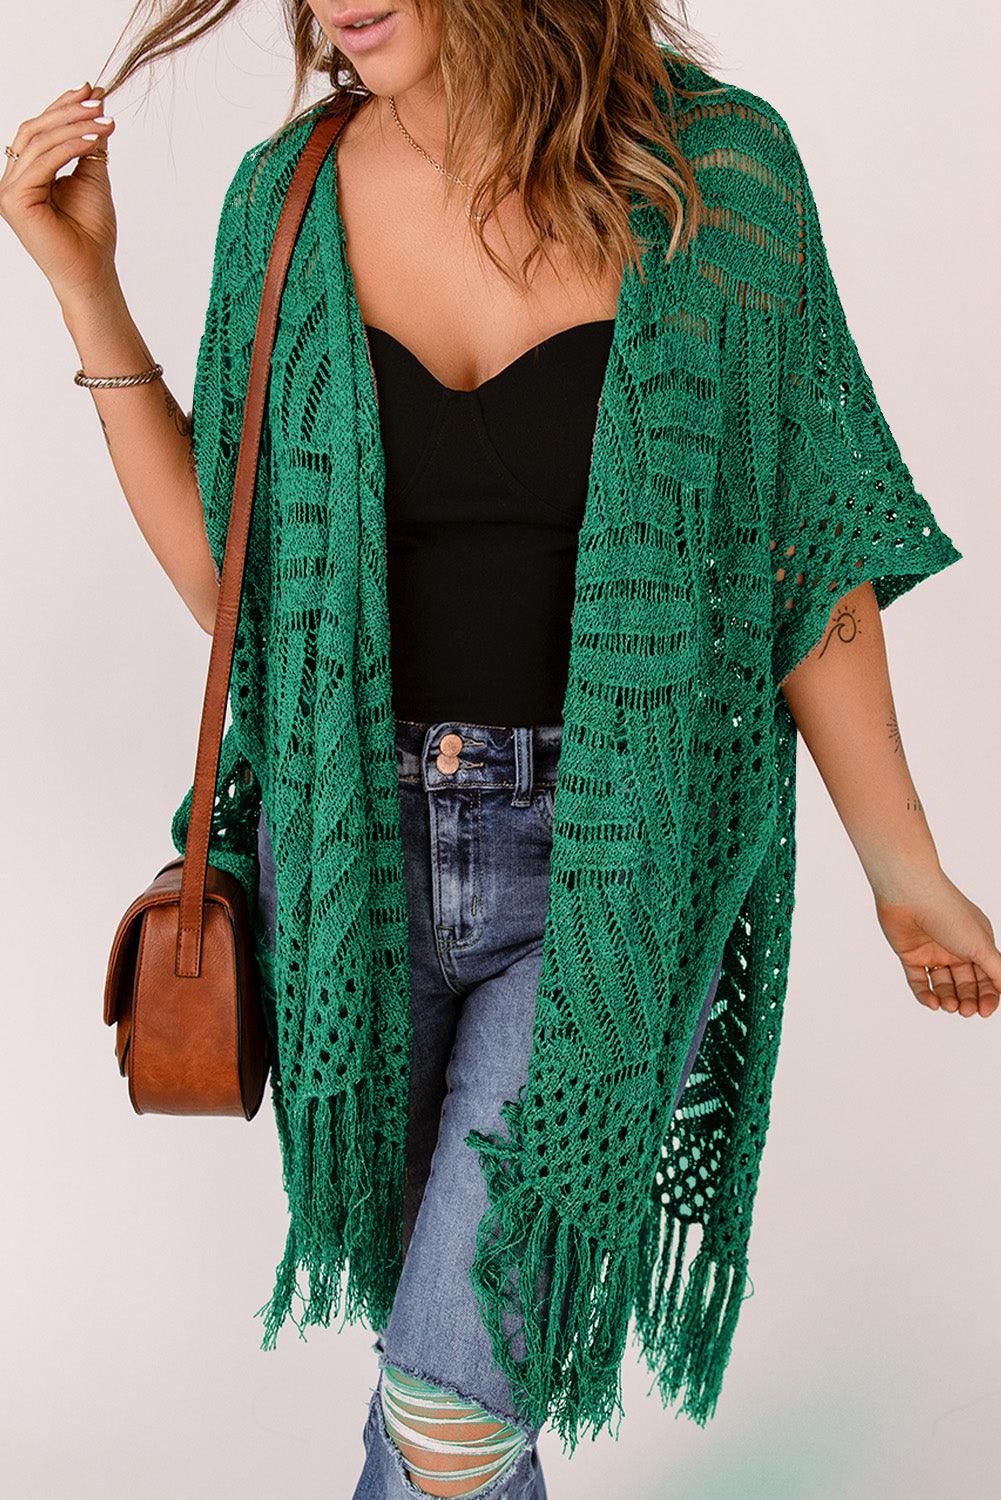 a woman wearing a green shawl and jeans